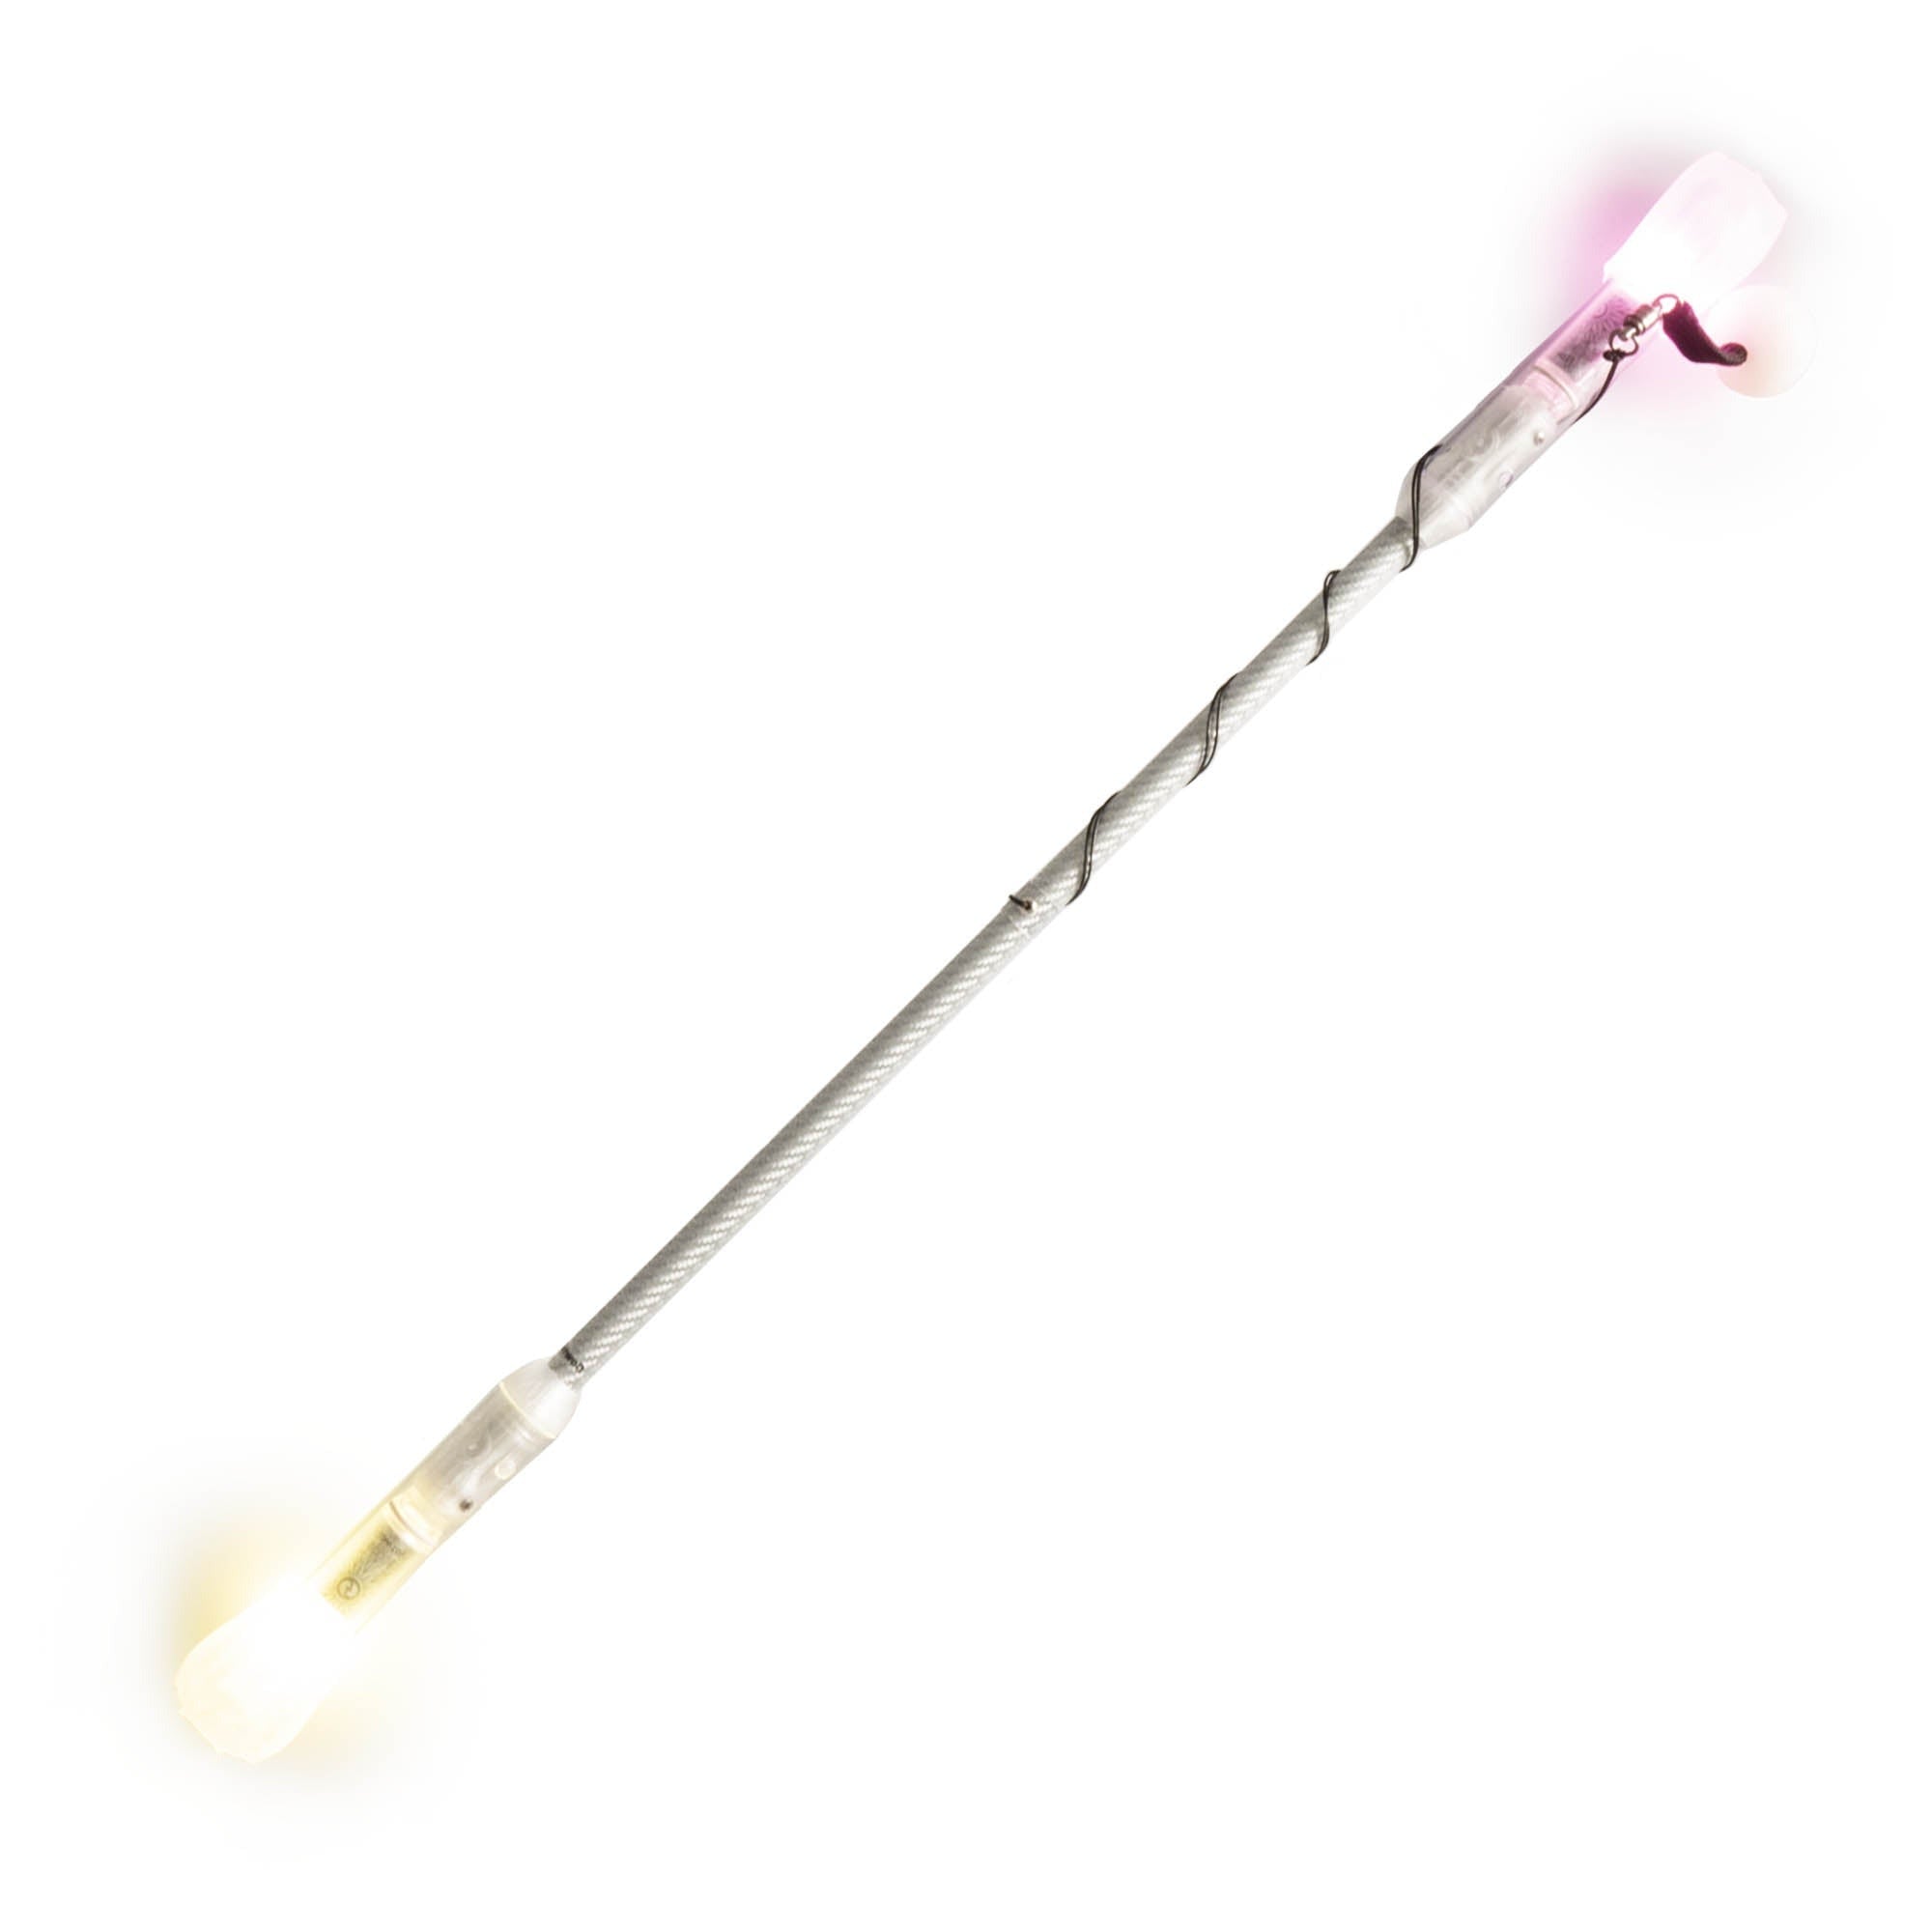 Flowtoys composite contact wand v2 glowing on a white background